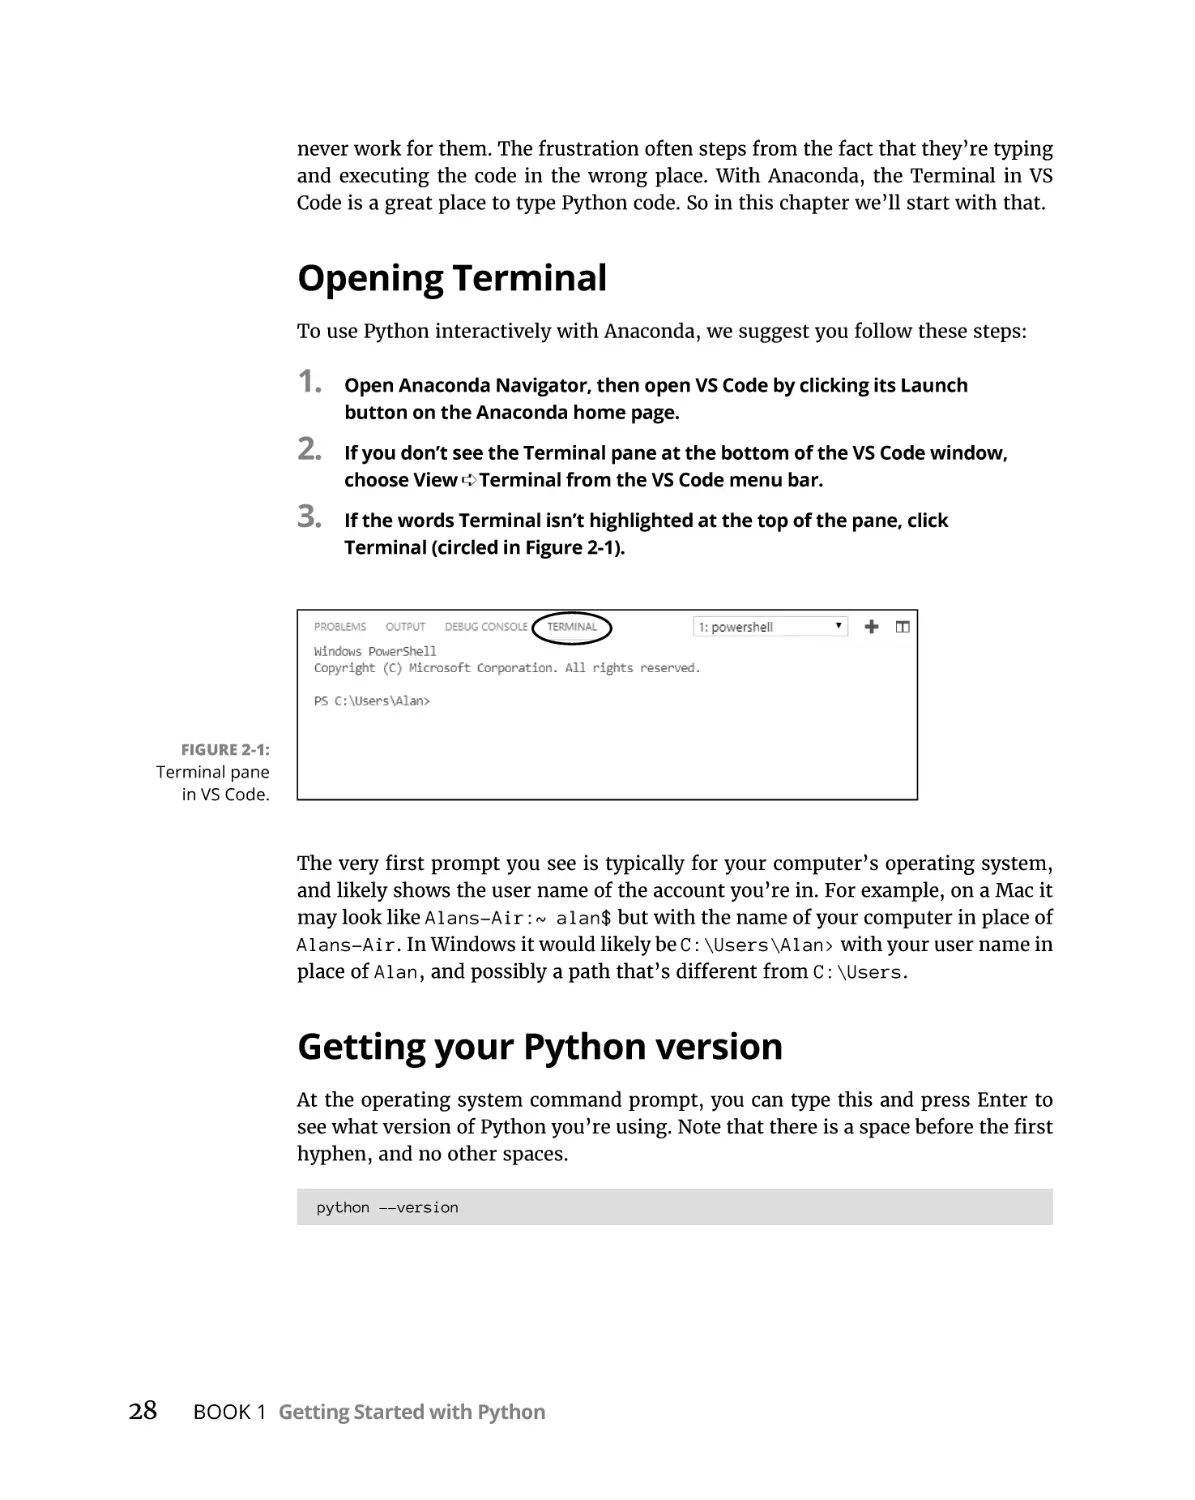 Opening Terminal
Getting your Python version